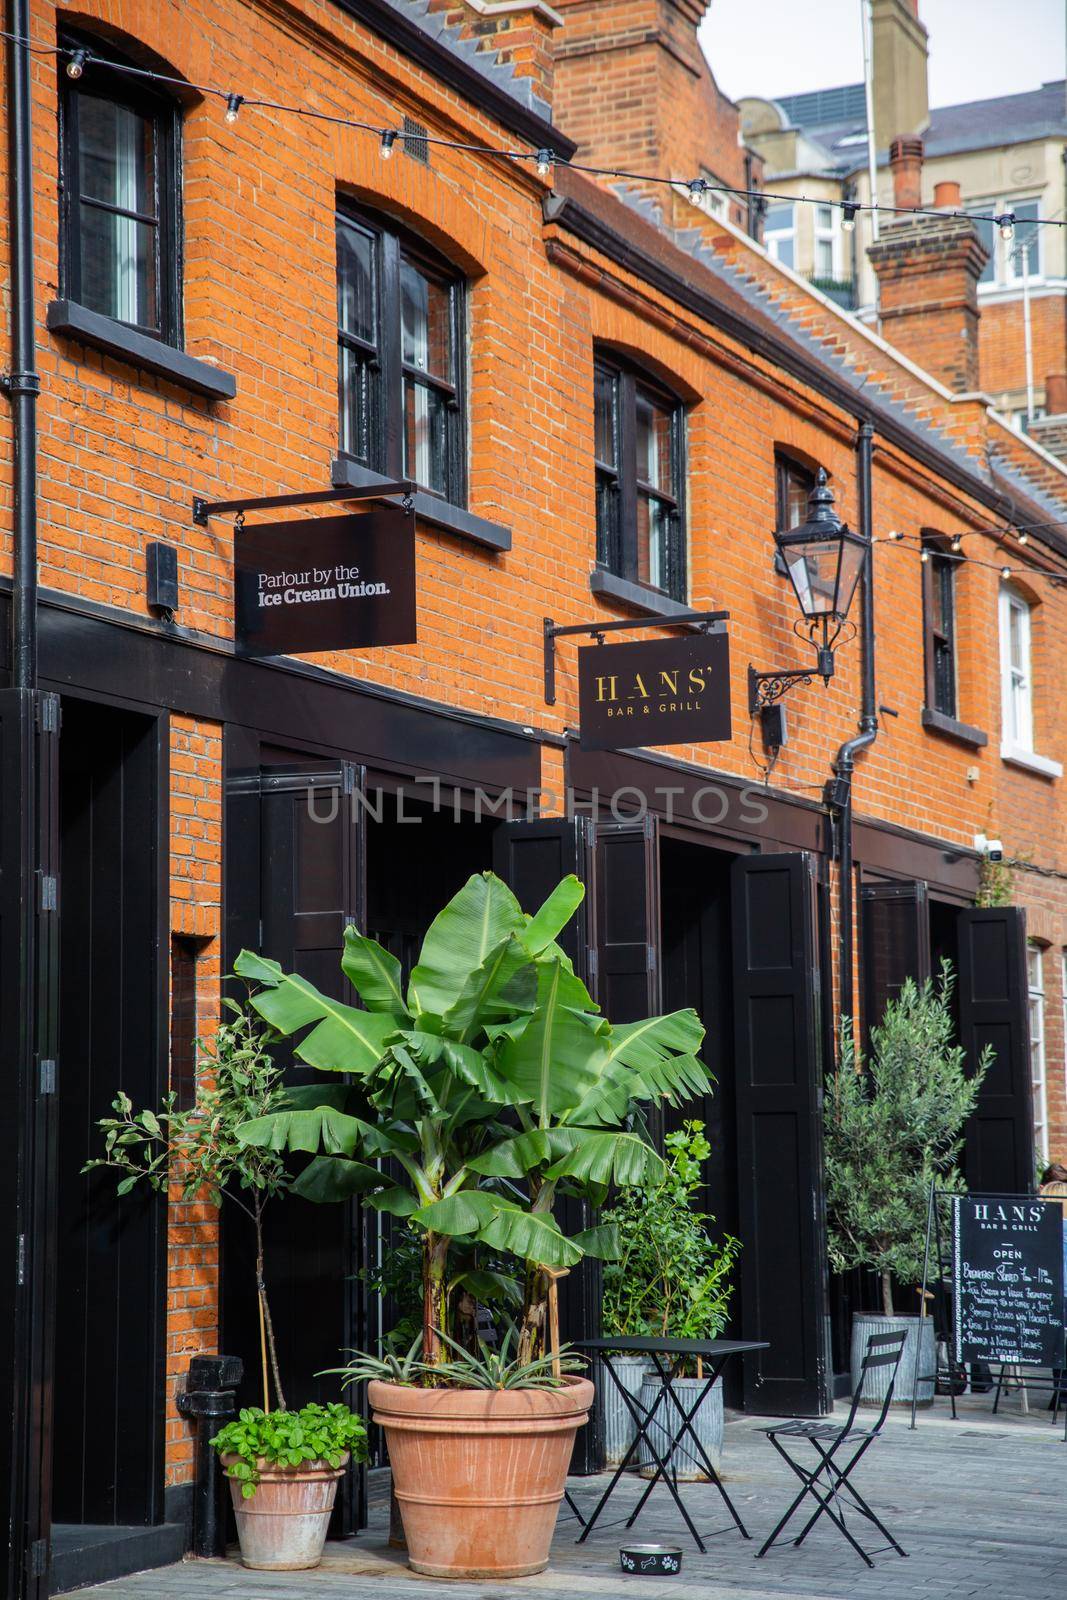 London, UK - February 14, Row of brick buildings with restaurants in Pavilion Road. Beautiful British brick buildings with classic architecture. Colorful London neighborhood